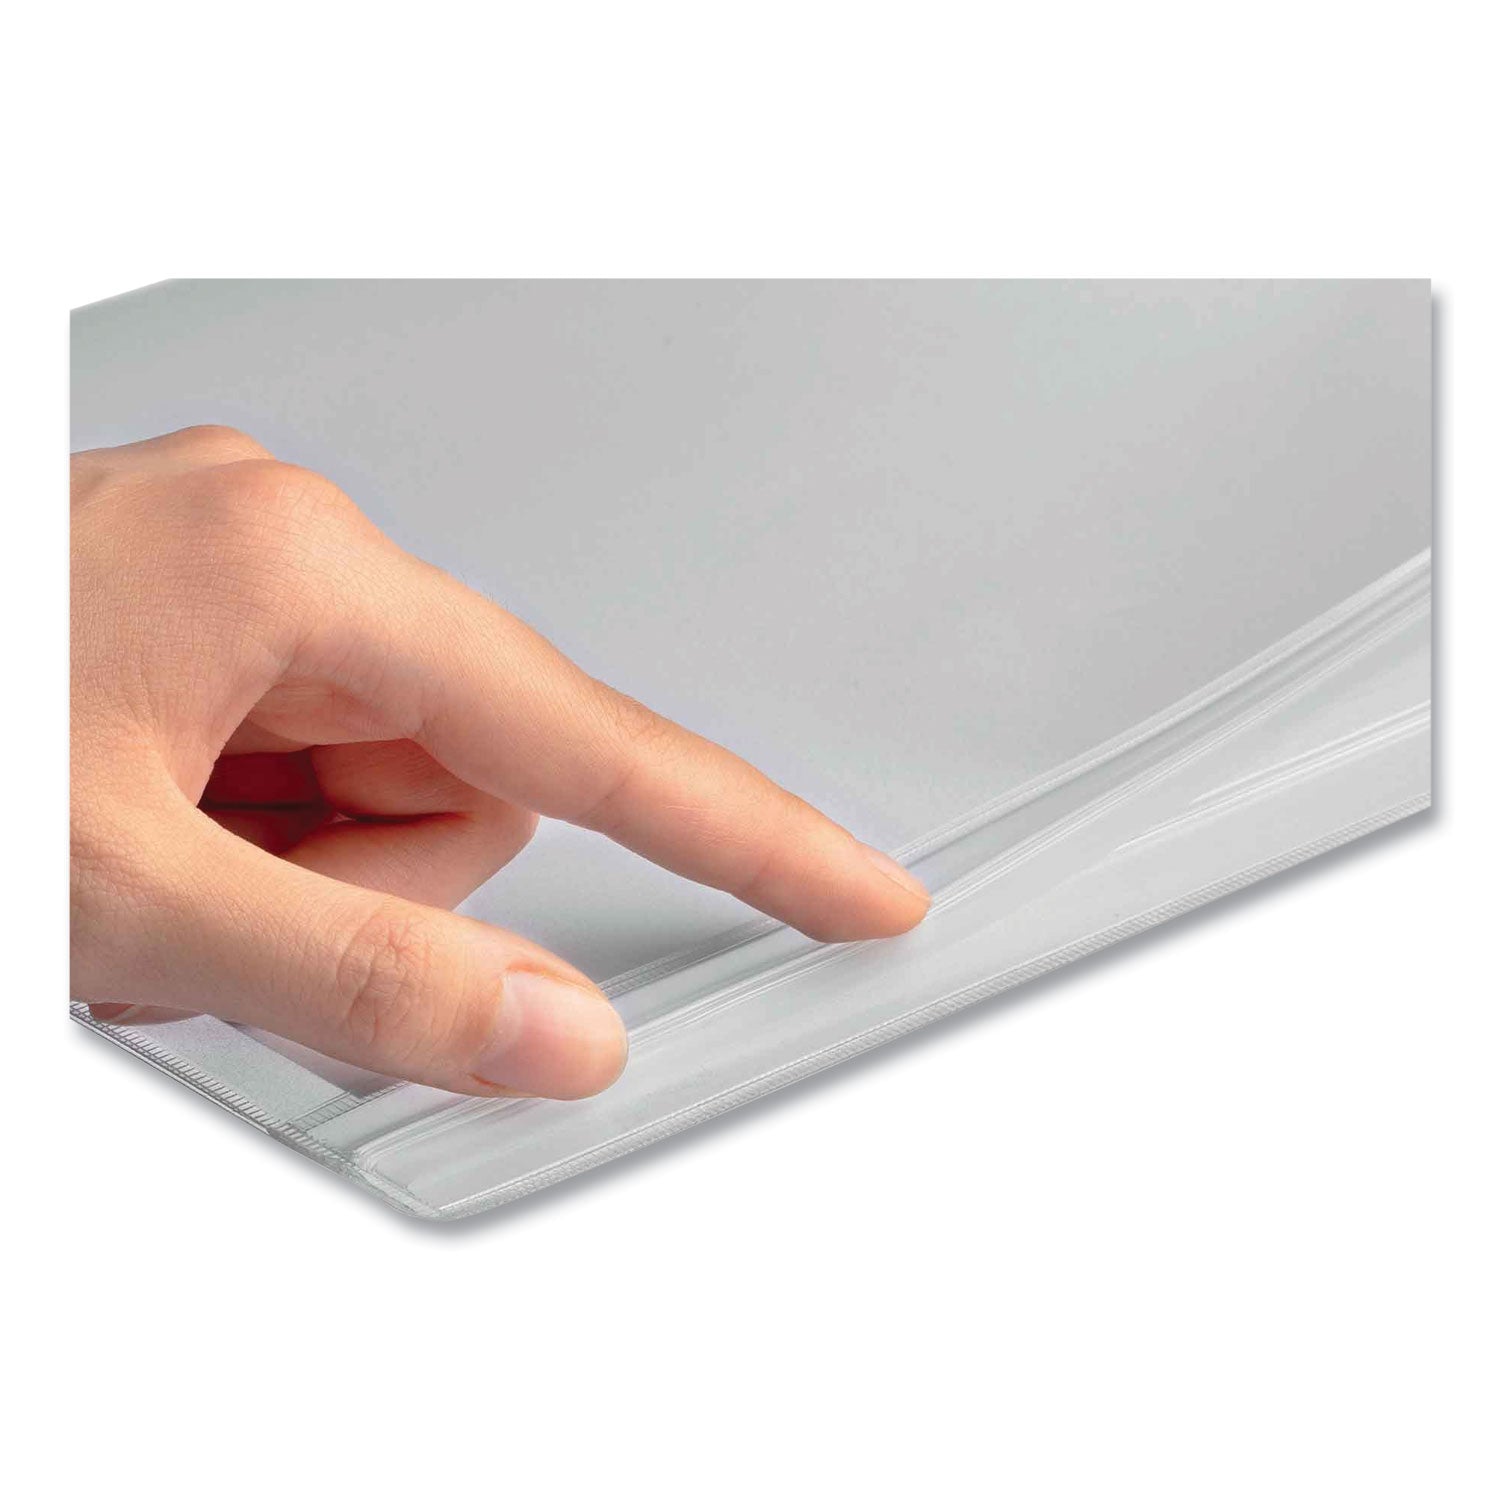 self-adhesive-water-resistant-sign-holder-85-x-11-clear-frame-5-pack_dbl501619 - 4